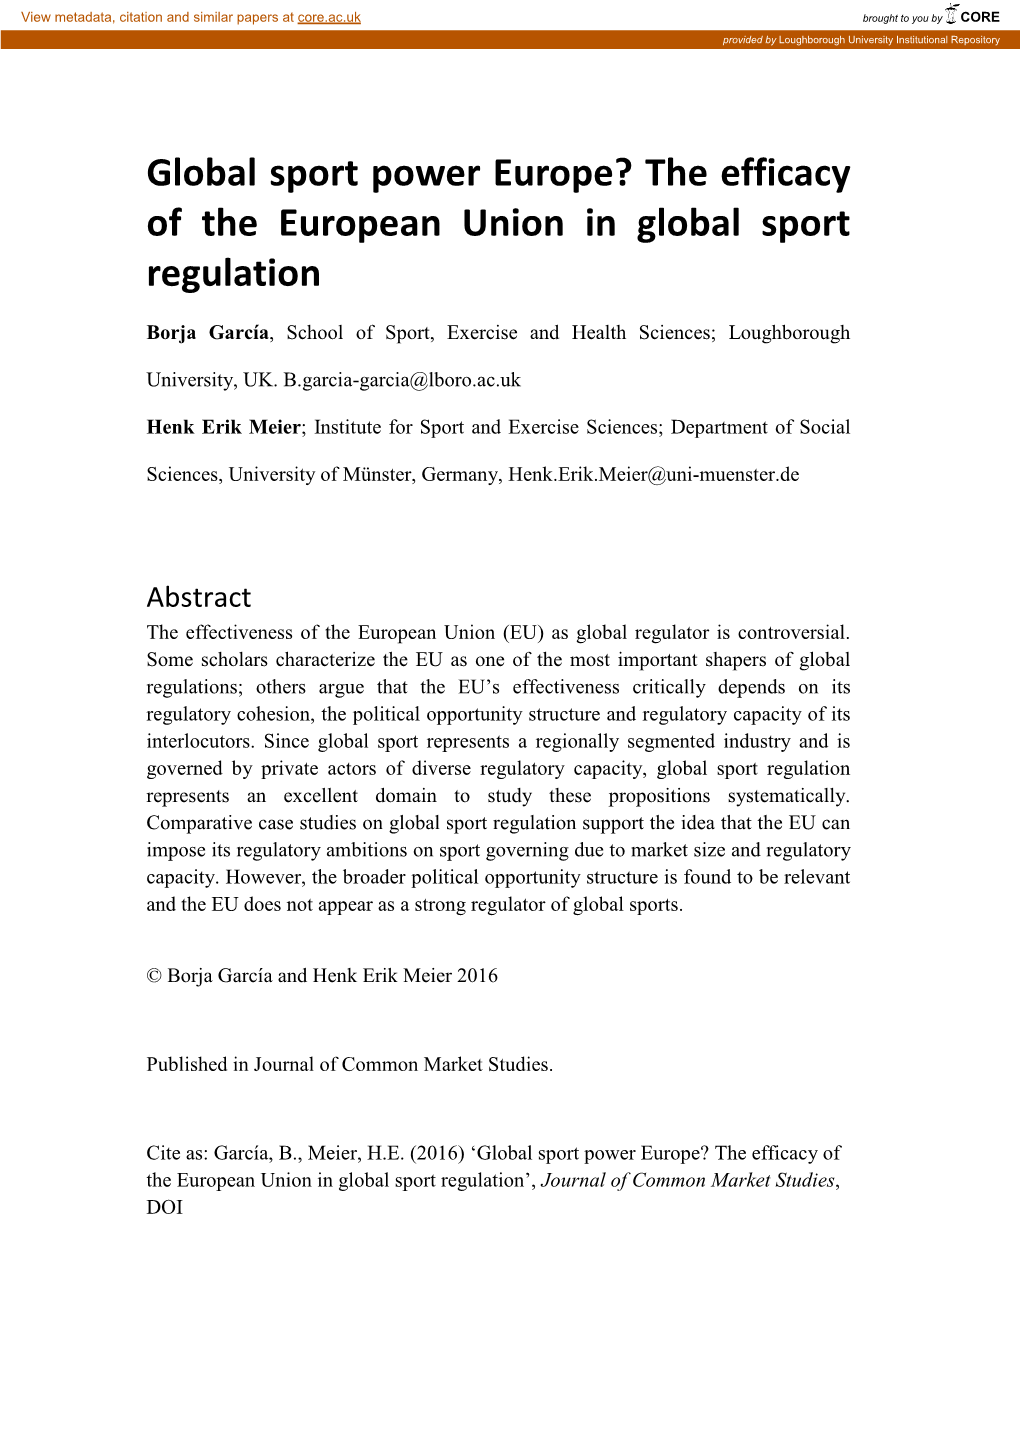 The Efficacy of the European Union in Global Sport Regulation